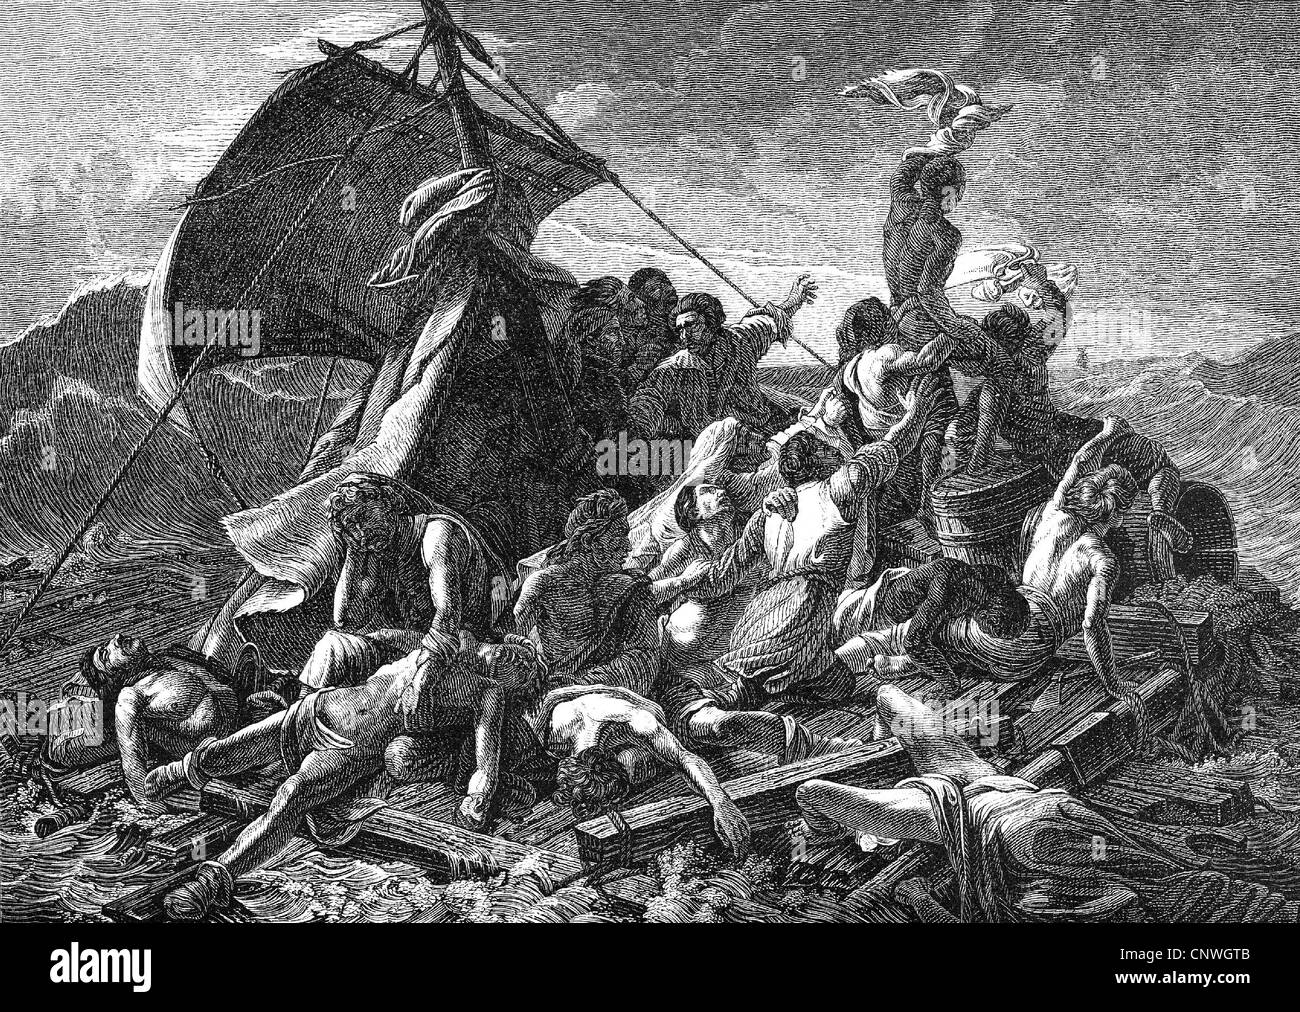 transport / transportation, navigation, disaster, shipwrecked sailors, 'The Raft of the Medusa', wood engraving after painting by Theodore Gericault (1791 - 1824), Additional-Rights-Clearences-Not Available Stock Photo